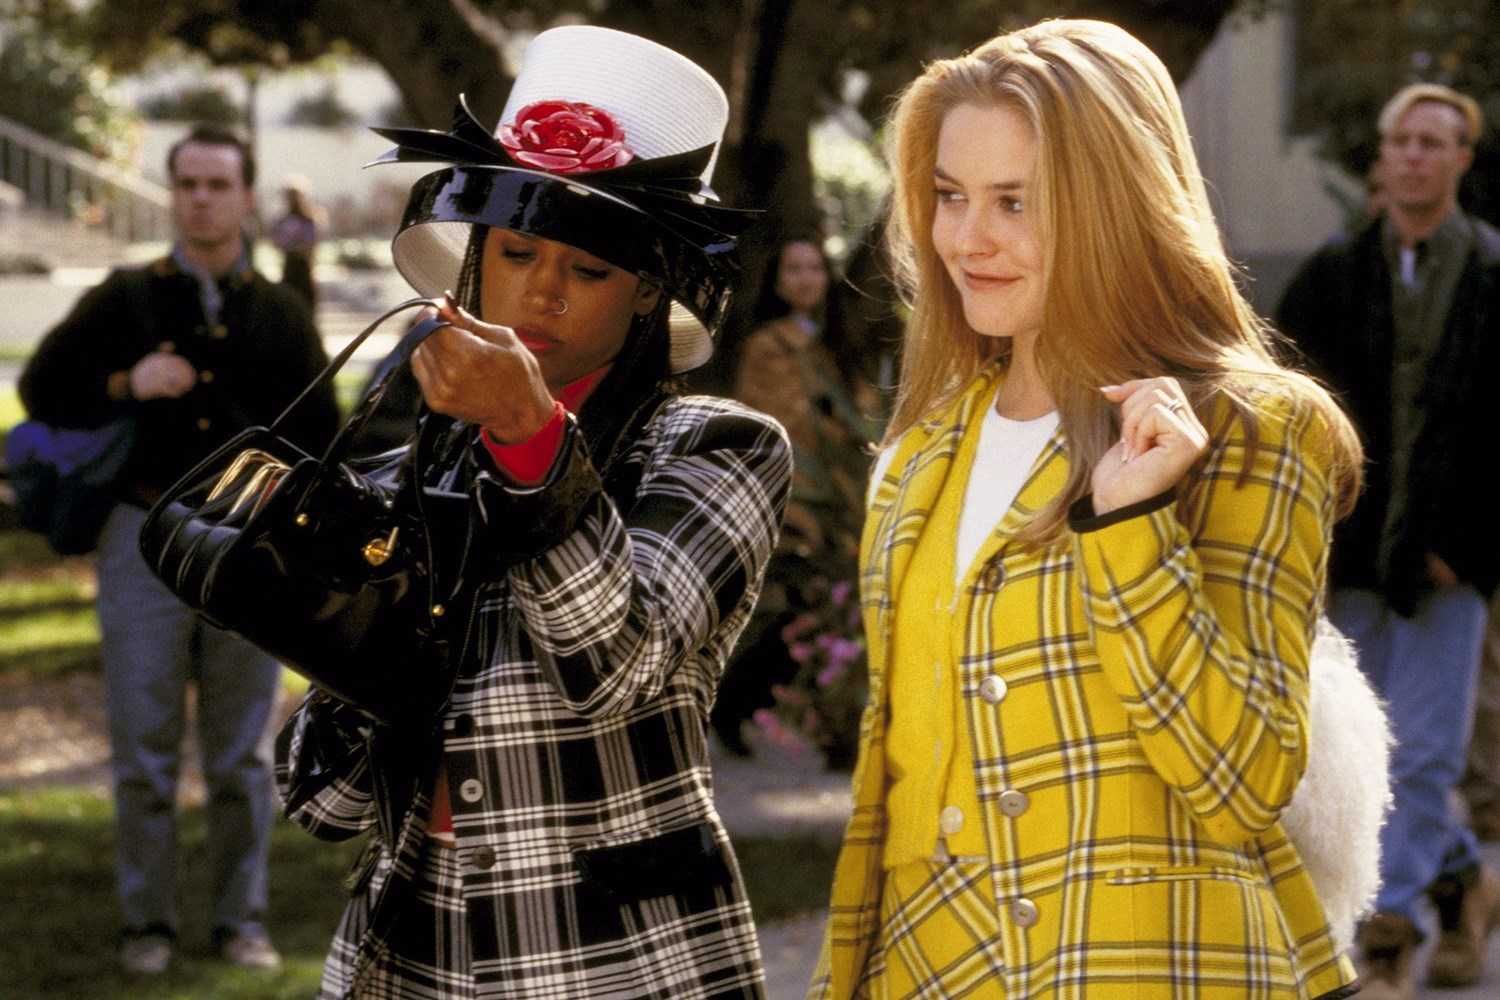 The ’90s Fashion Trends We Can’t Believe We Loved